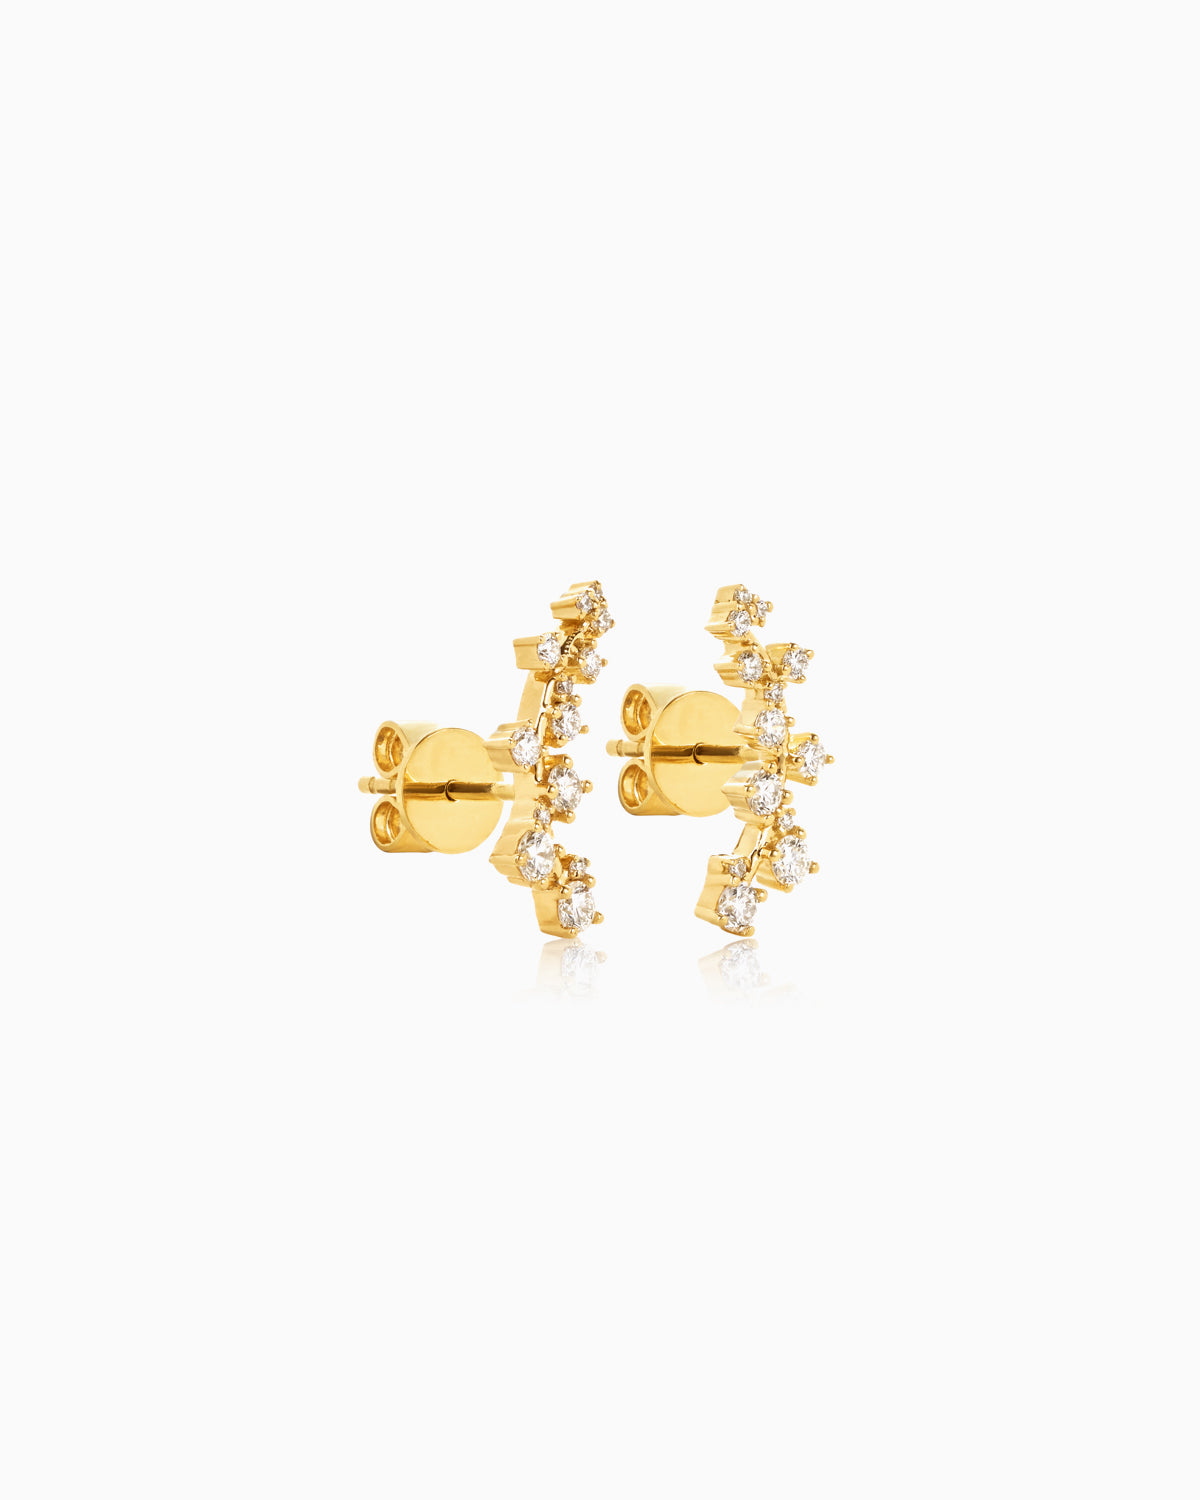 Starburst Diamond Ear Climber, crafted in luxurious 18k yellow gold